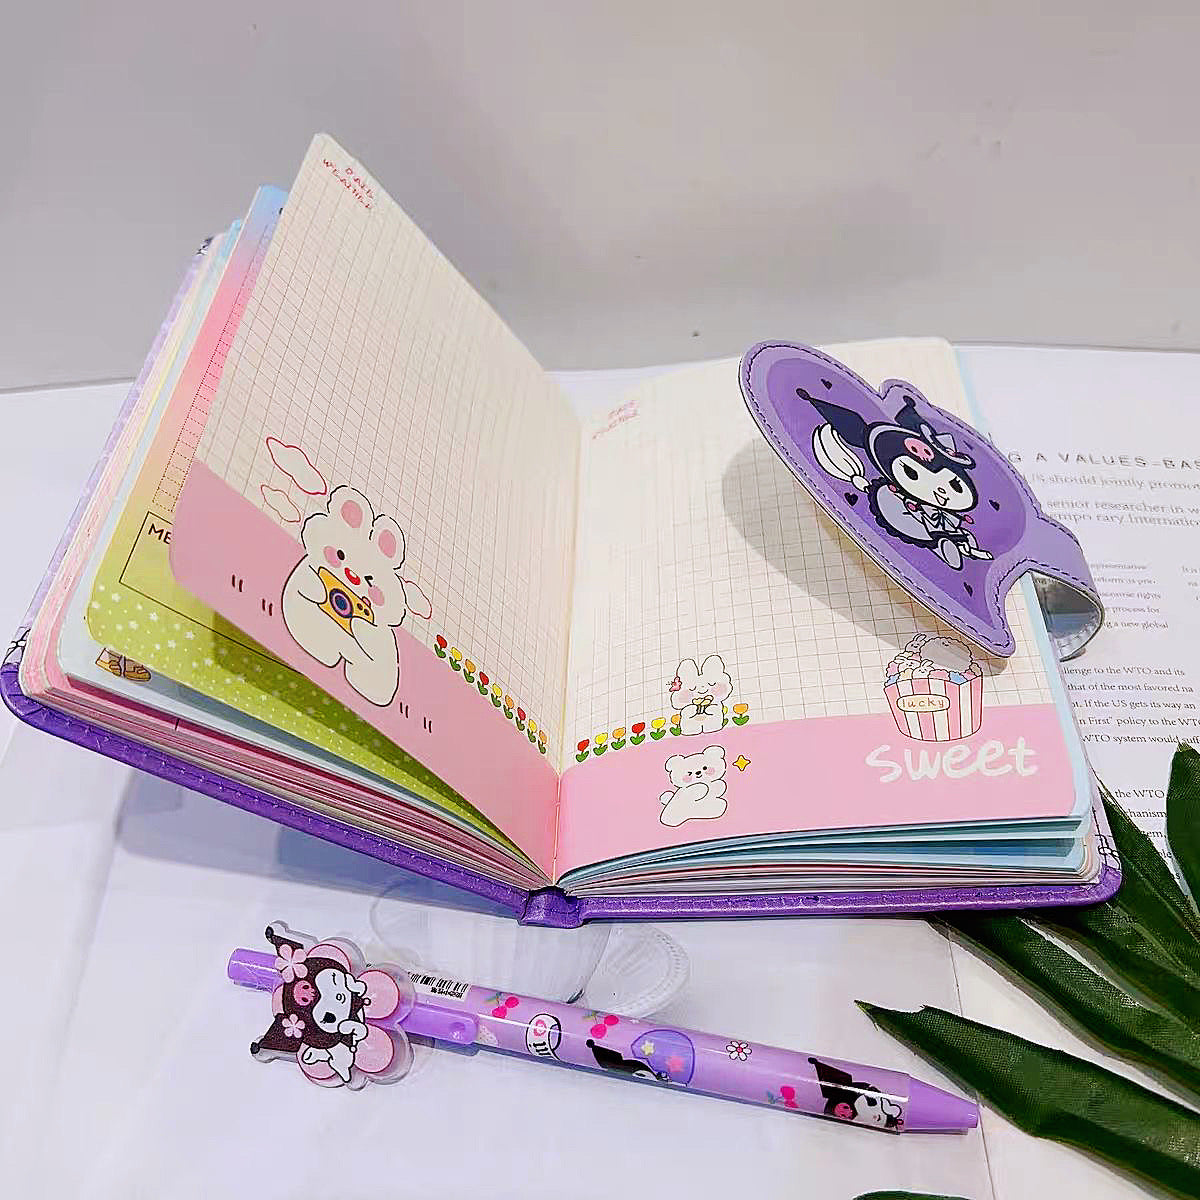 SANRIO NOTEBOOK GIFT PACK